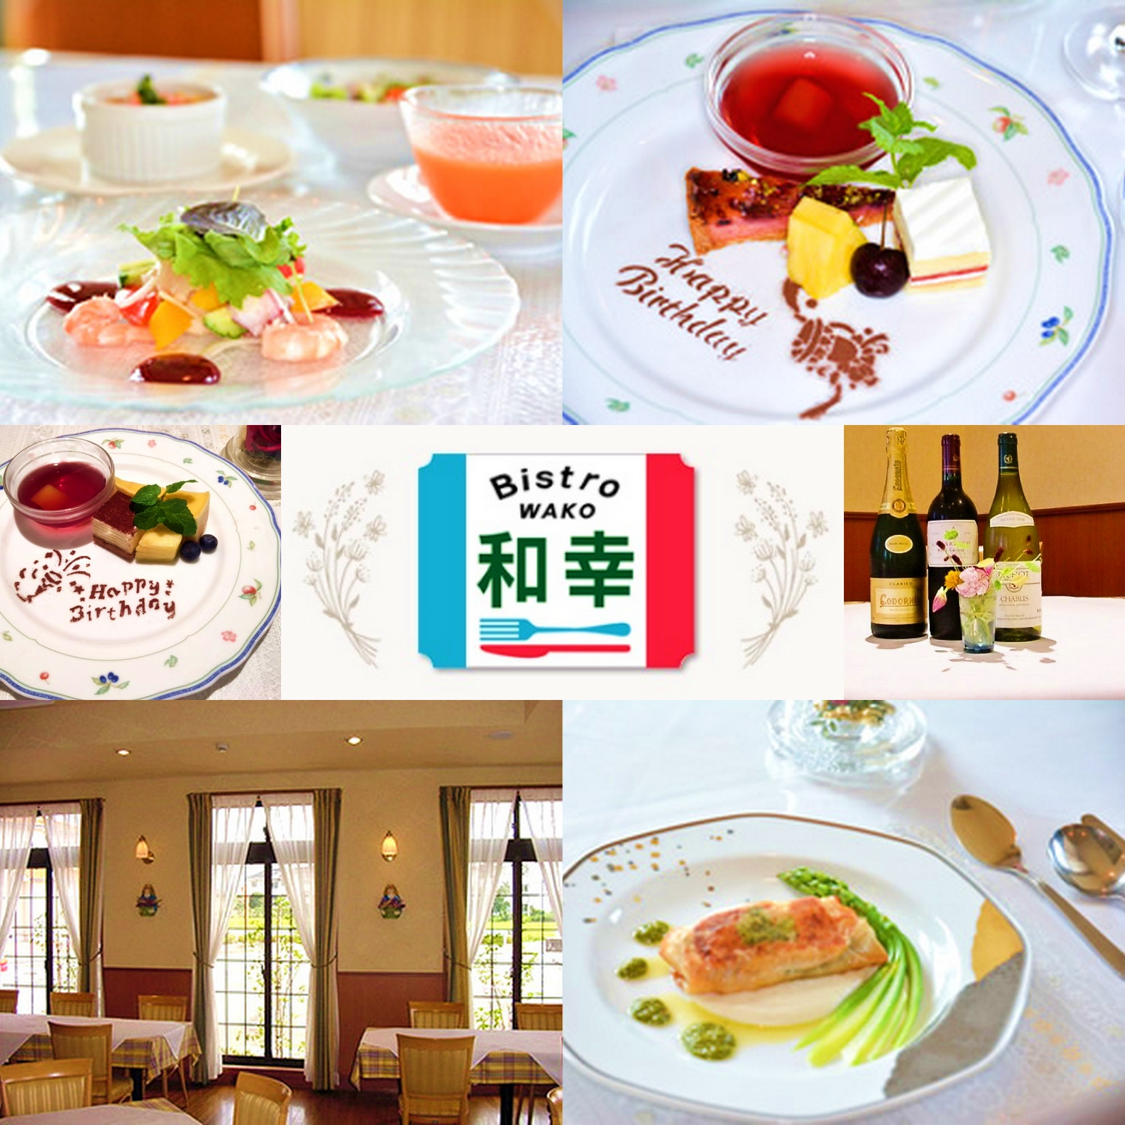 It's reasonably priced but authentic French ♪ It's a perfect place for anniversaries to spend time with your loved ones.